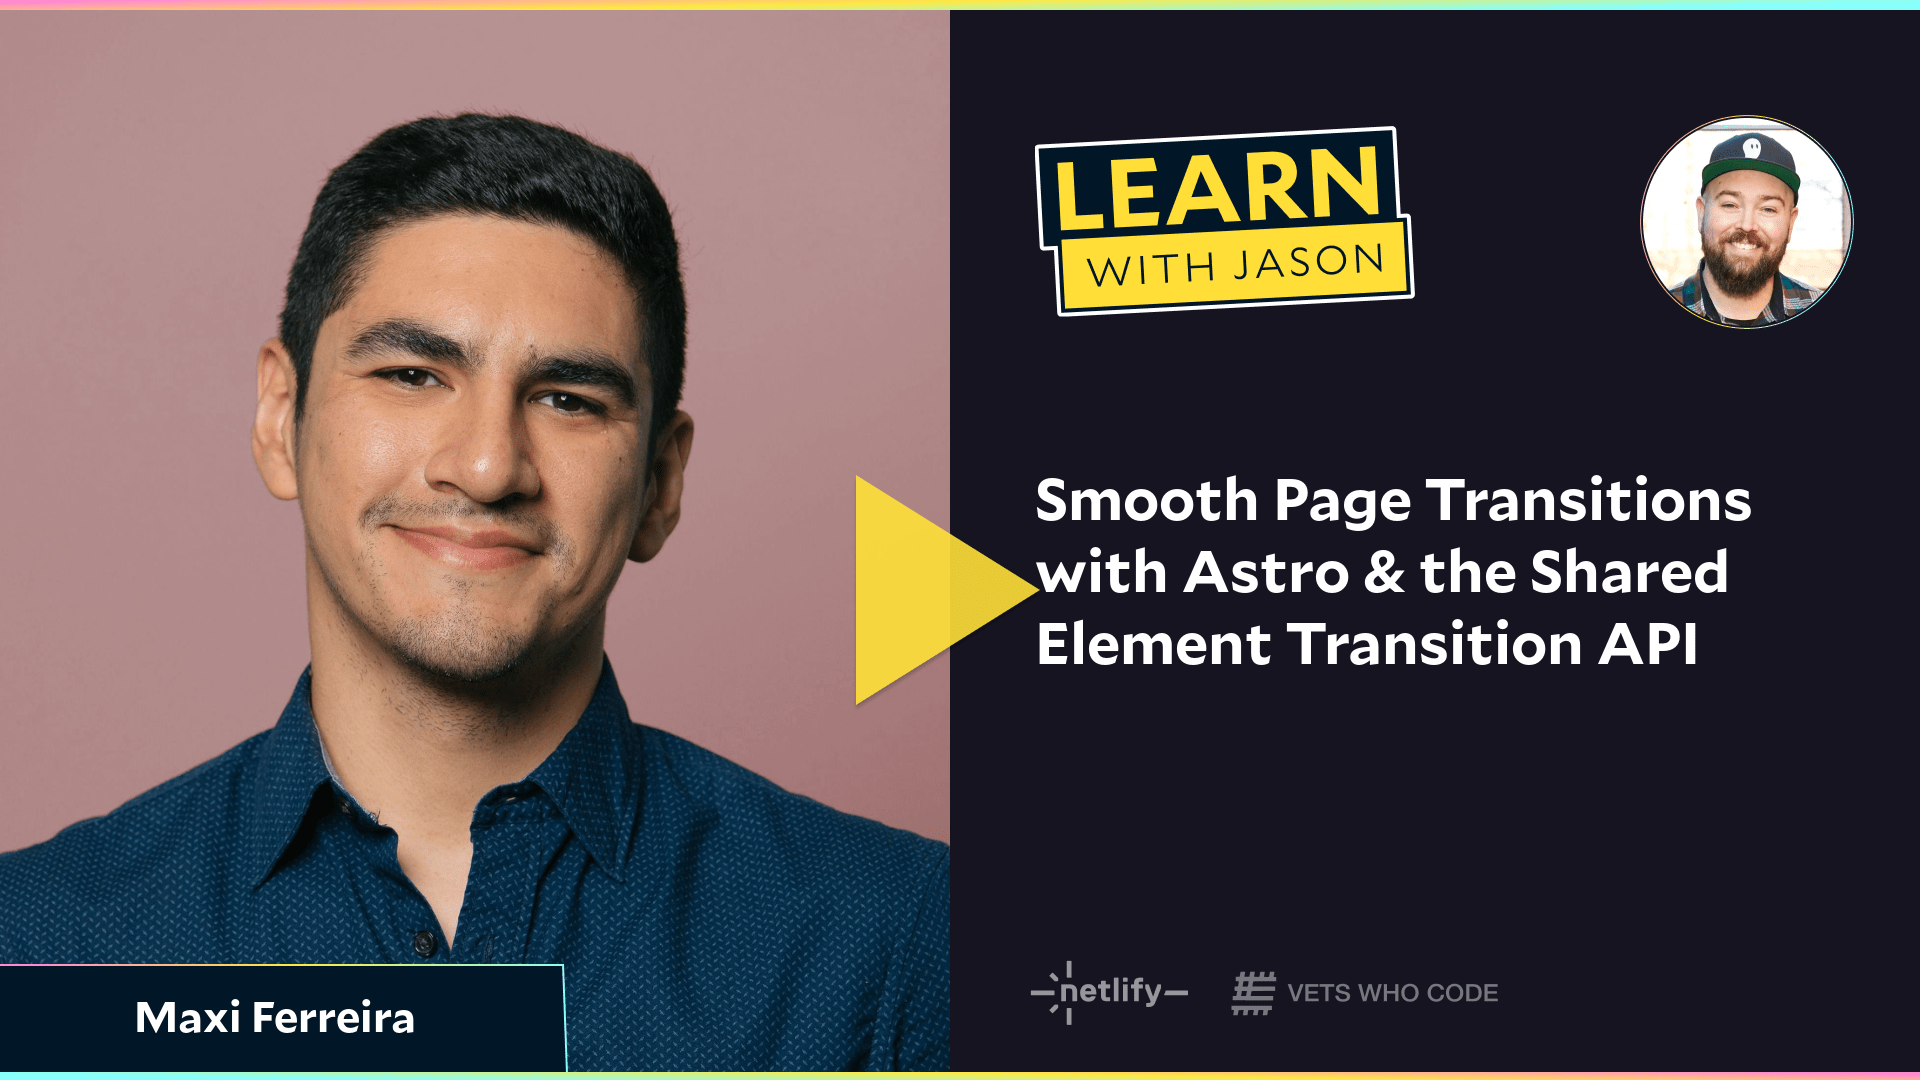 Smooth Page Transitions with Astro & the Shared Element Transition API (with Maxi Ferreira)